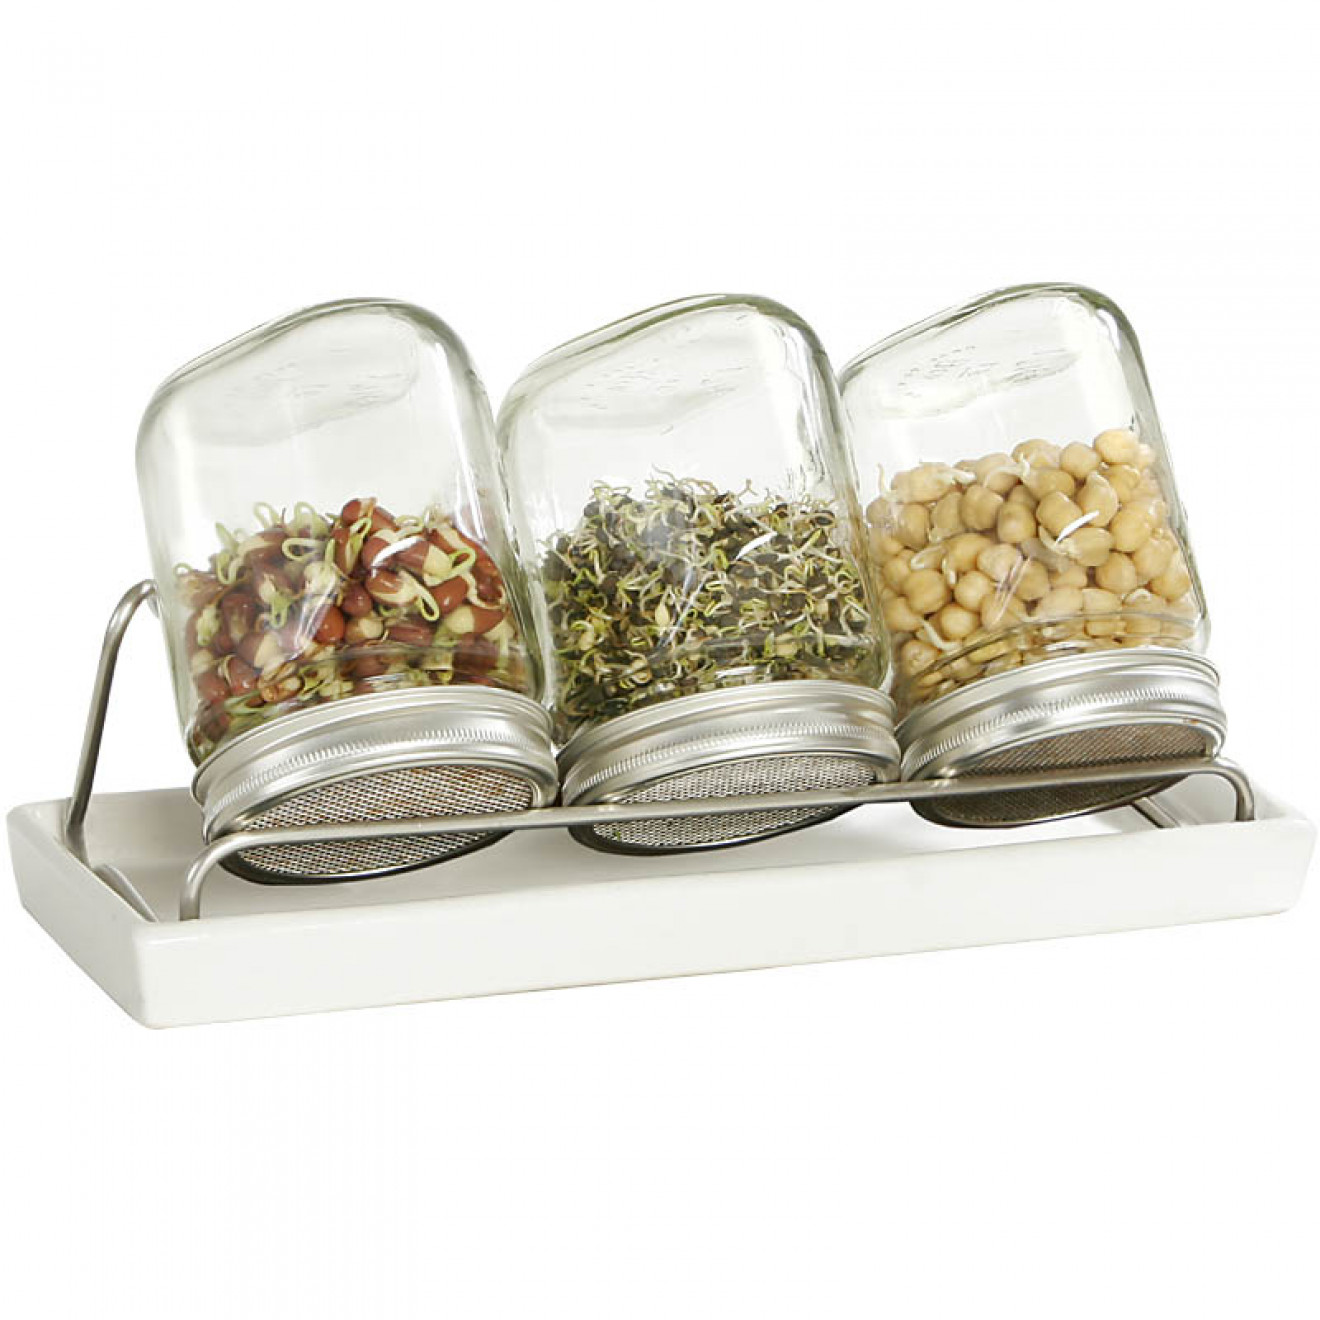 Wooden Spice Jar Set With Replaceable Lid and Scooper